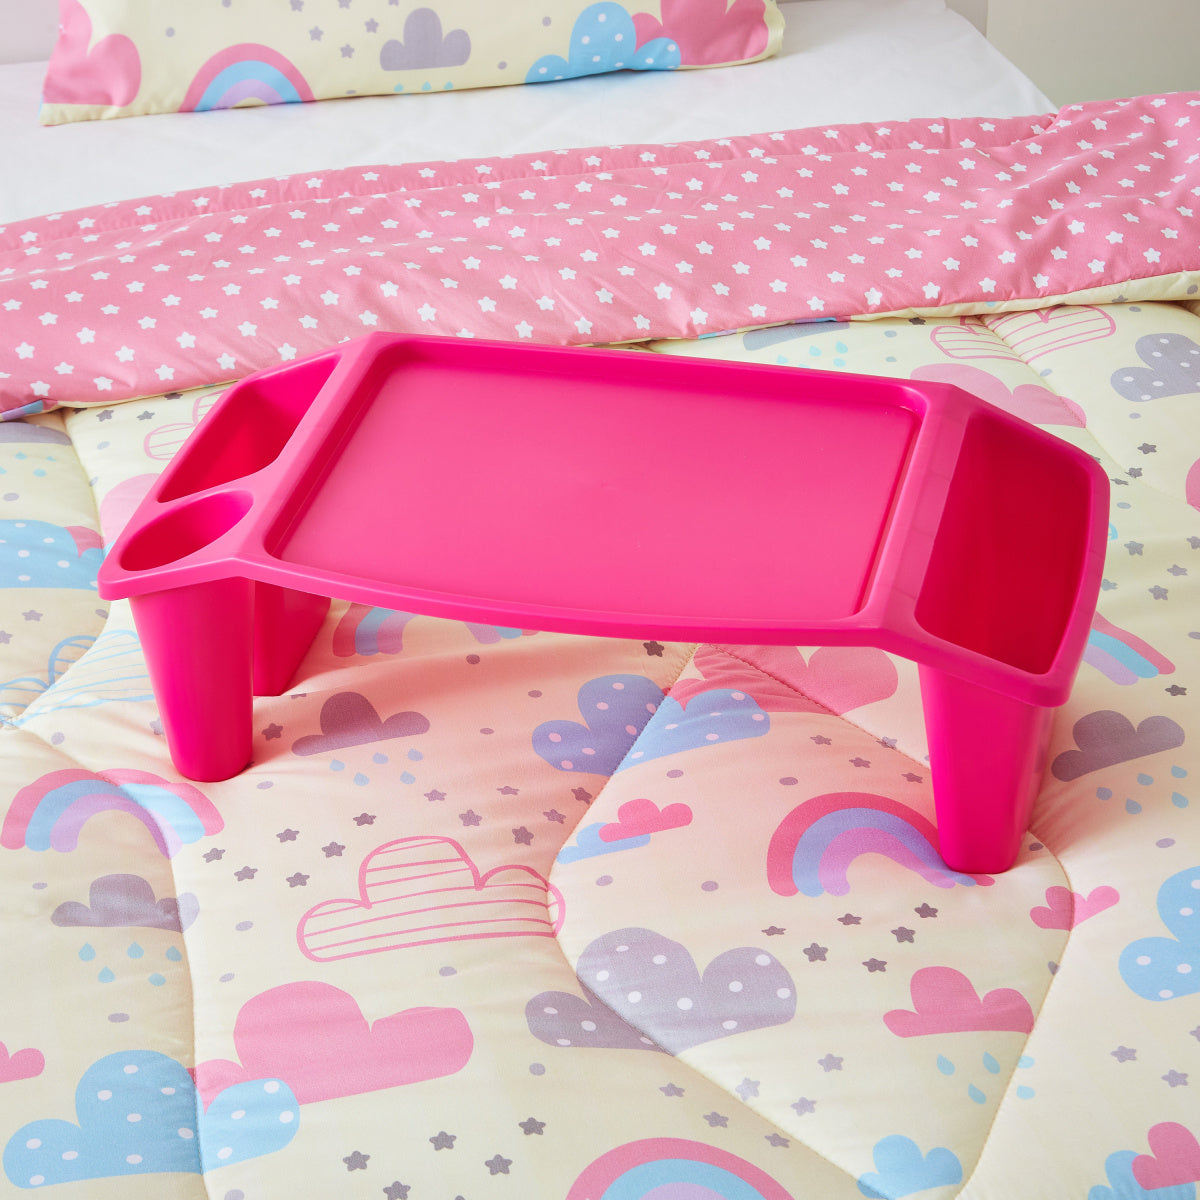 Vega Breakfast and Laptop Table Tray - tray for kids - pink laptop tray + bed tray makes your kids into more available for the best products we have at our store